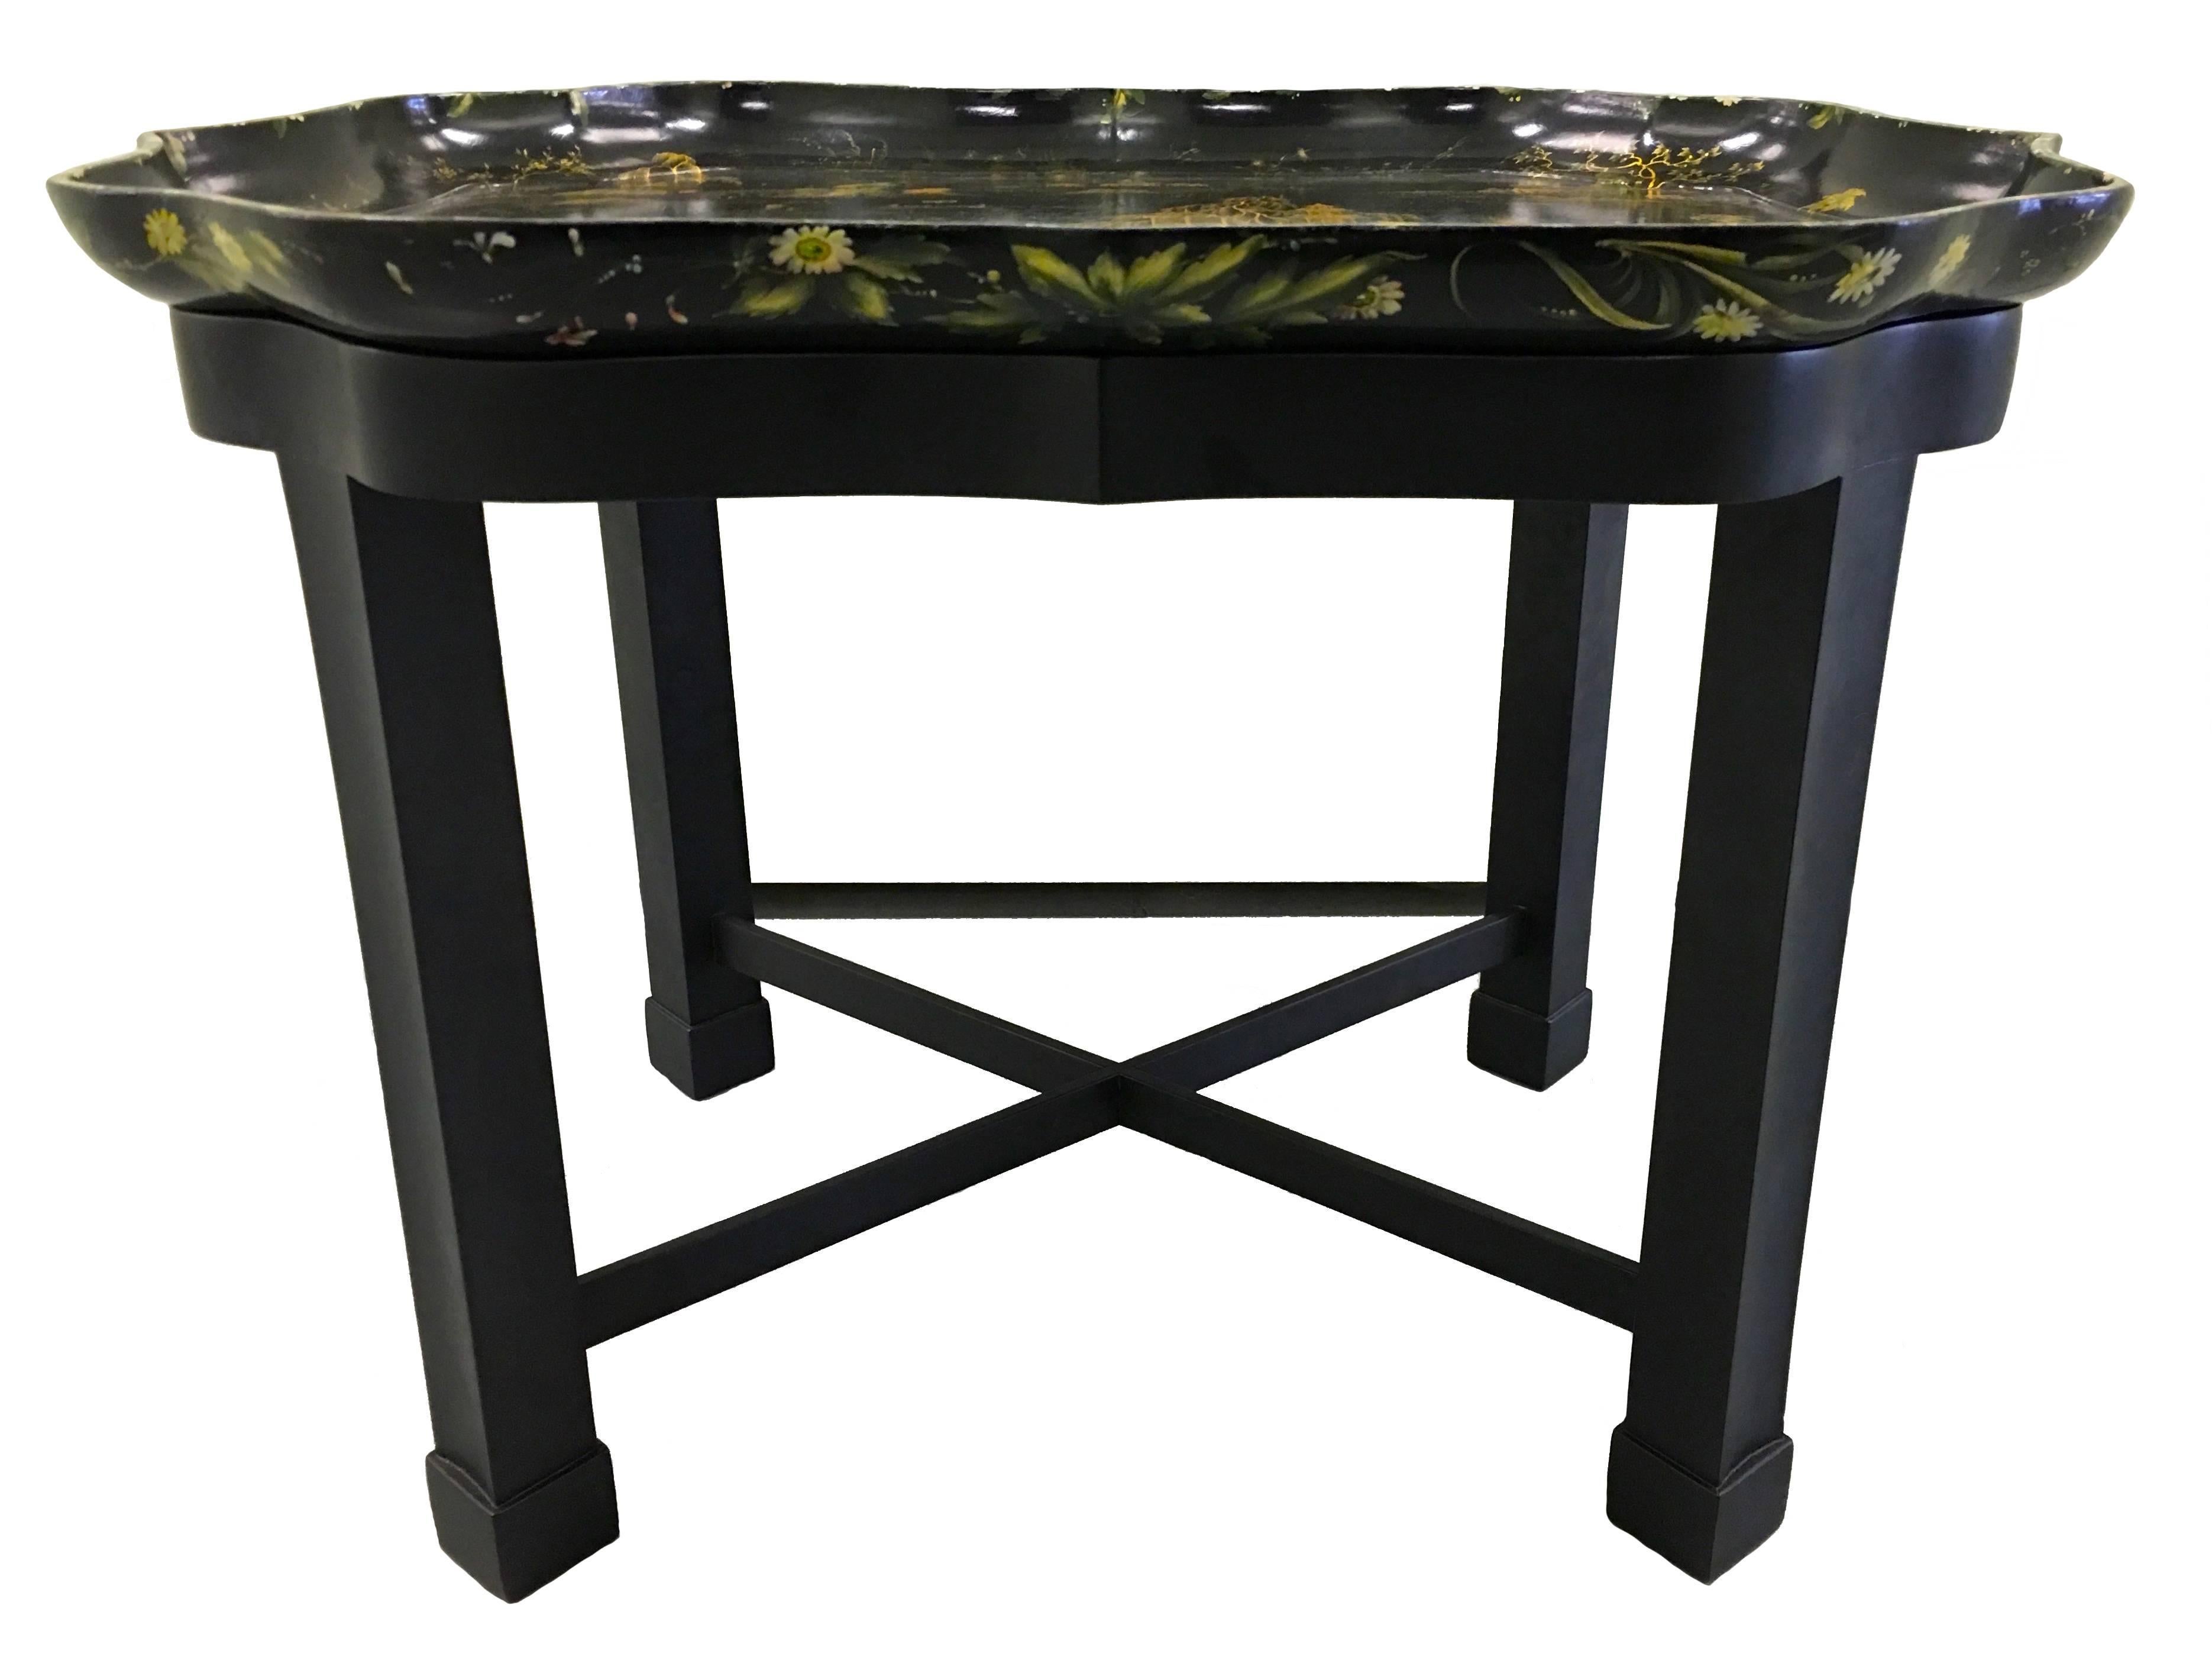 British Chinoiserie Papier Mâché Tray on Stand by Henry Clay